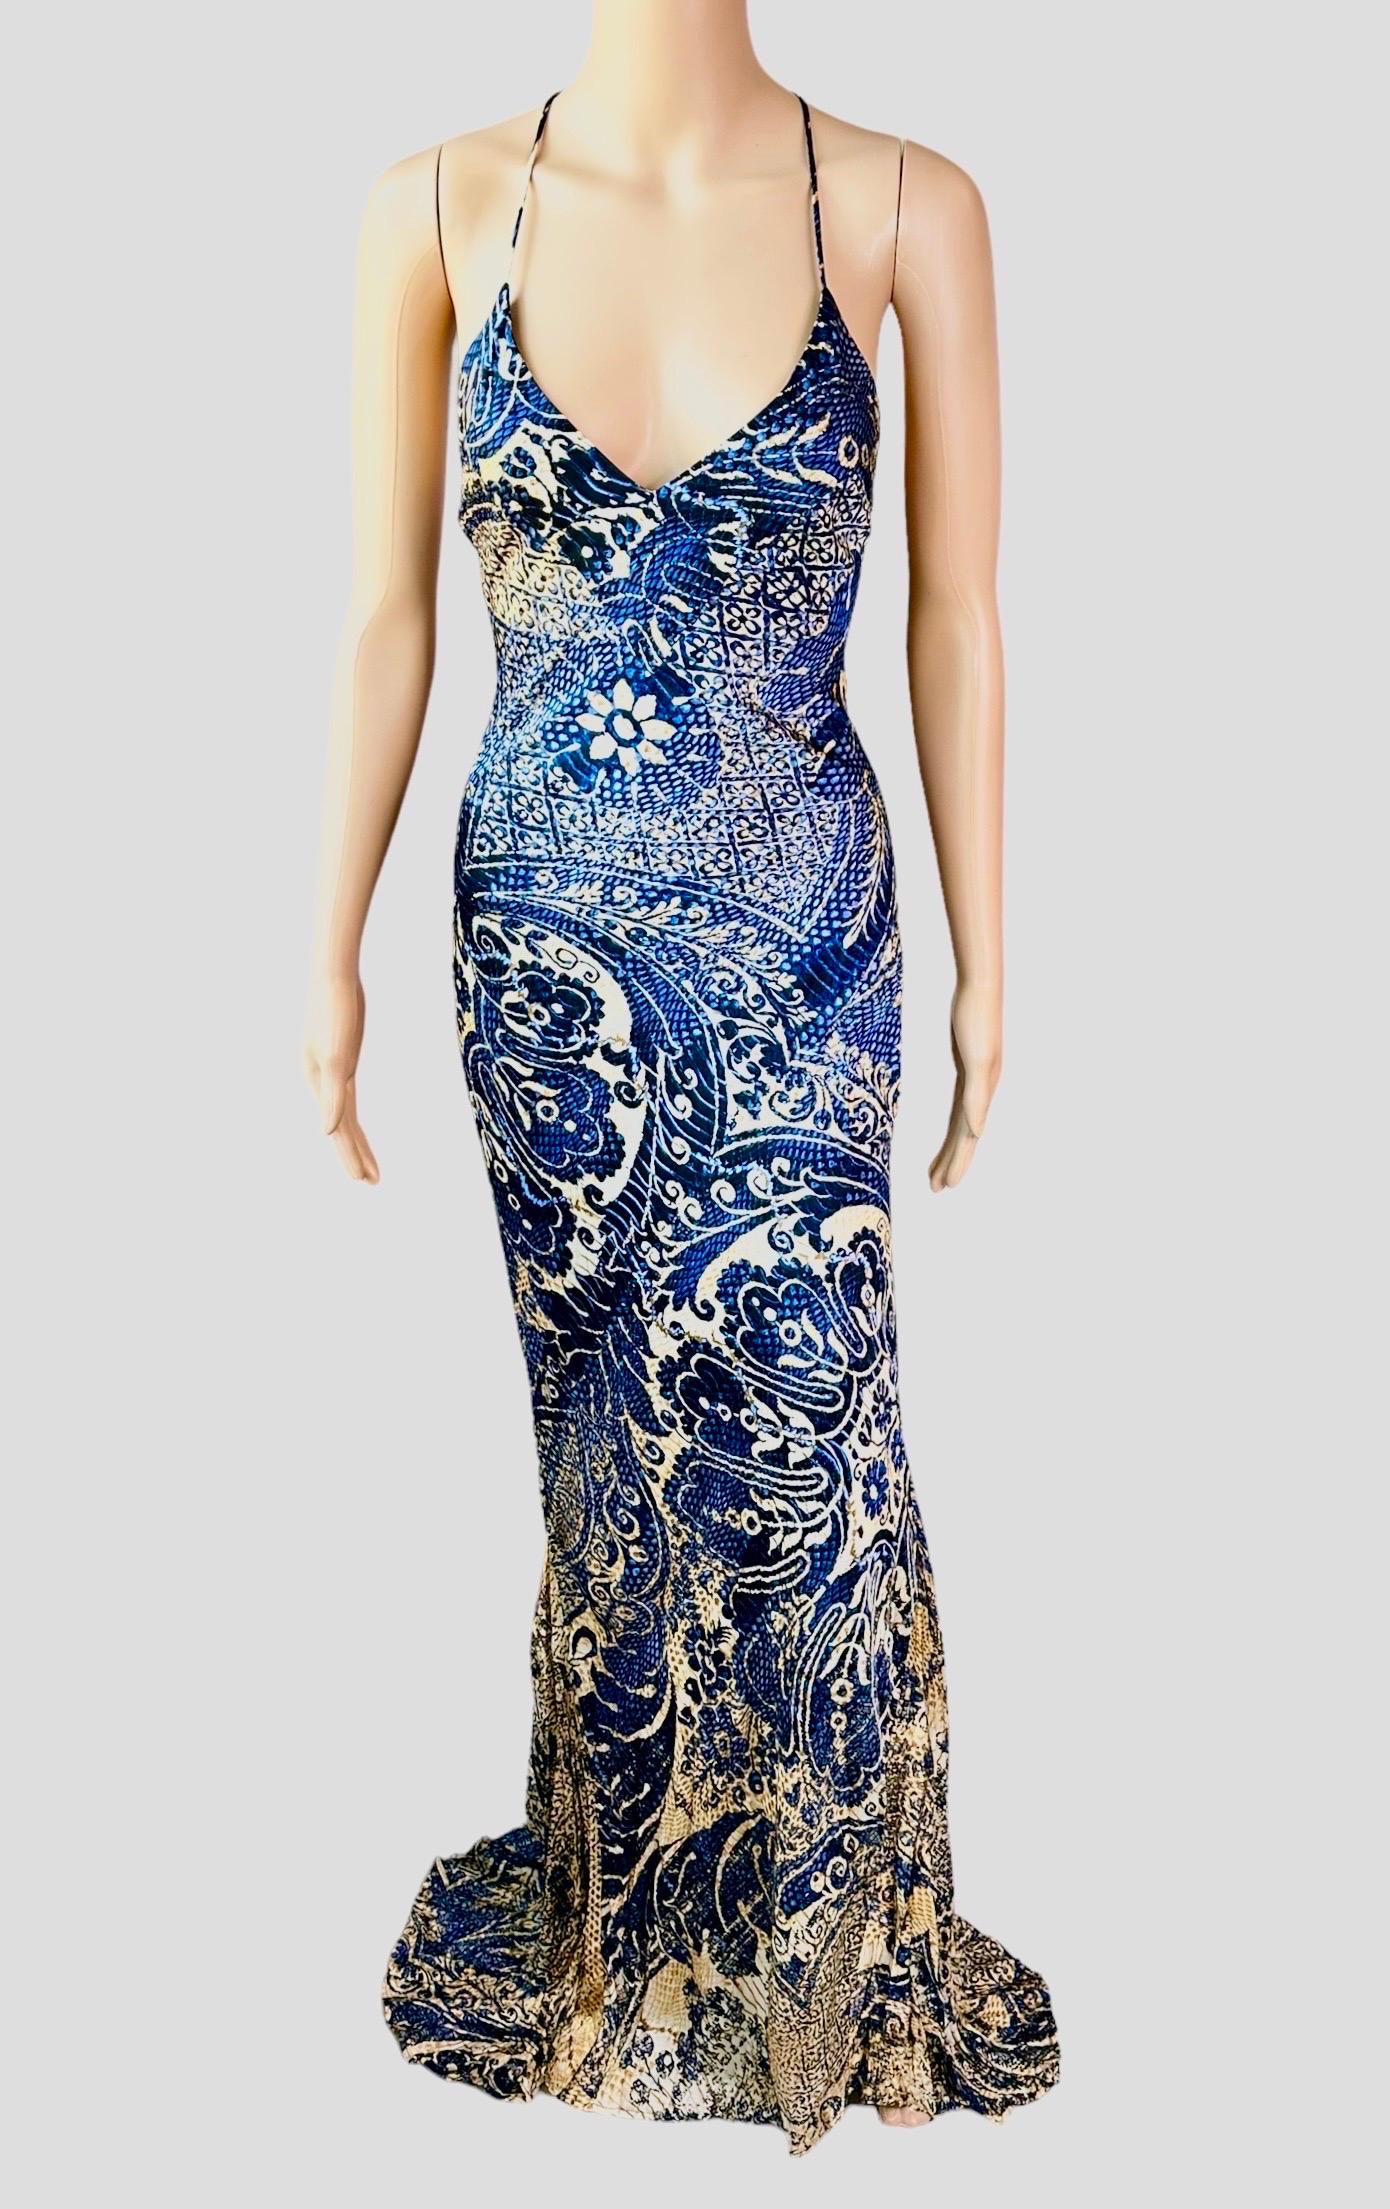 Roberto Cavalli c.2005 Bustier Abstract Print Train Maxi Evening Dress Gown For Sale 2